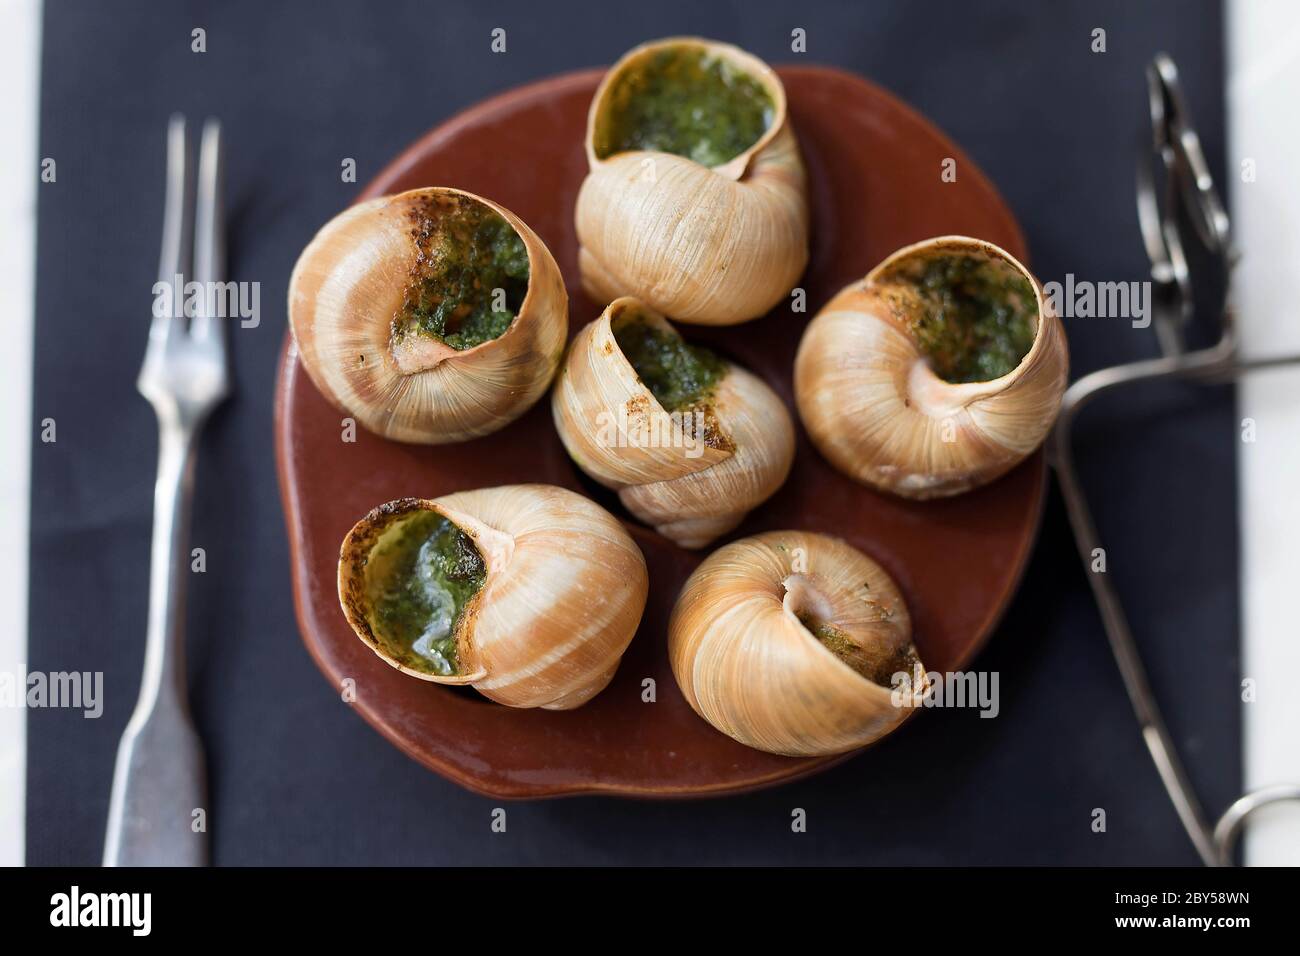 Snails with garlic butter in Dieppe, France. Stock Photo